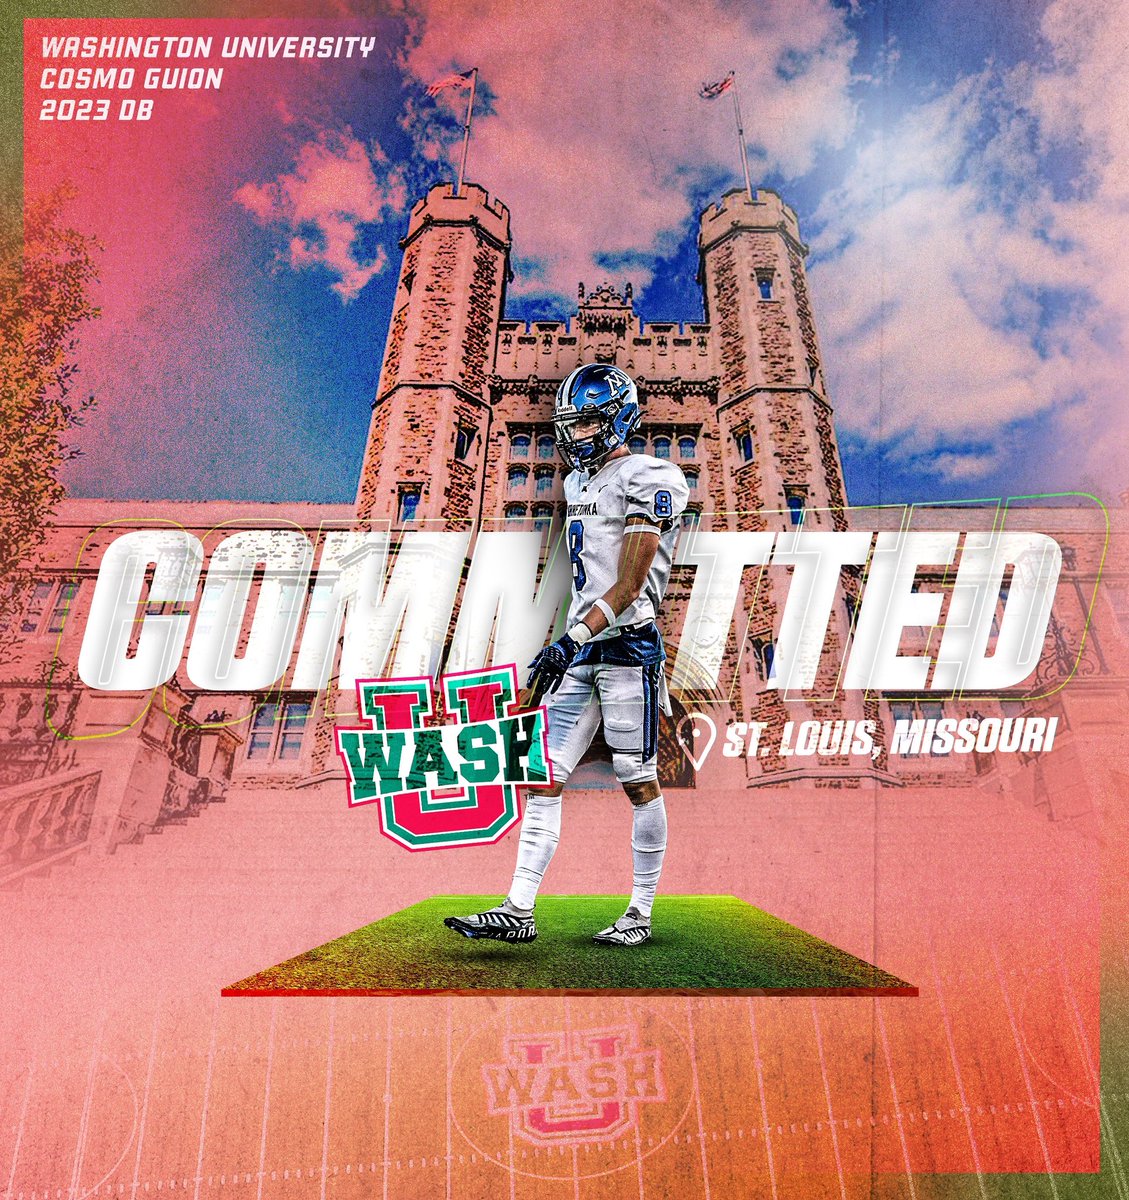 Extremely excited to announce my commitment to continue my athletic and academic career at the University of Washington in St.Louis. Cant wait for my next 4 years at WashU. #gobears🐻❤️💚@coachfish42 @washufootball @TonkaFB